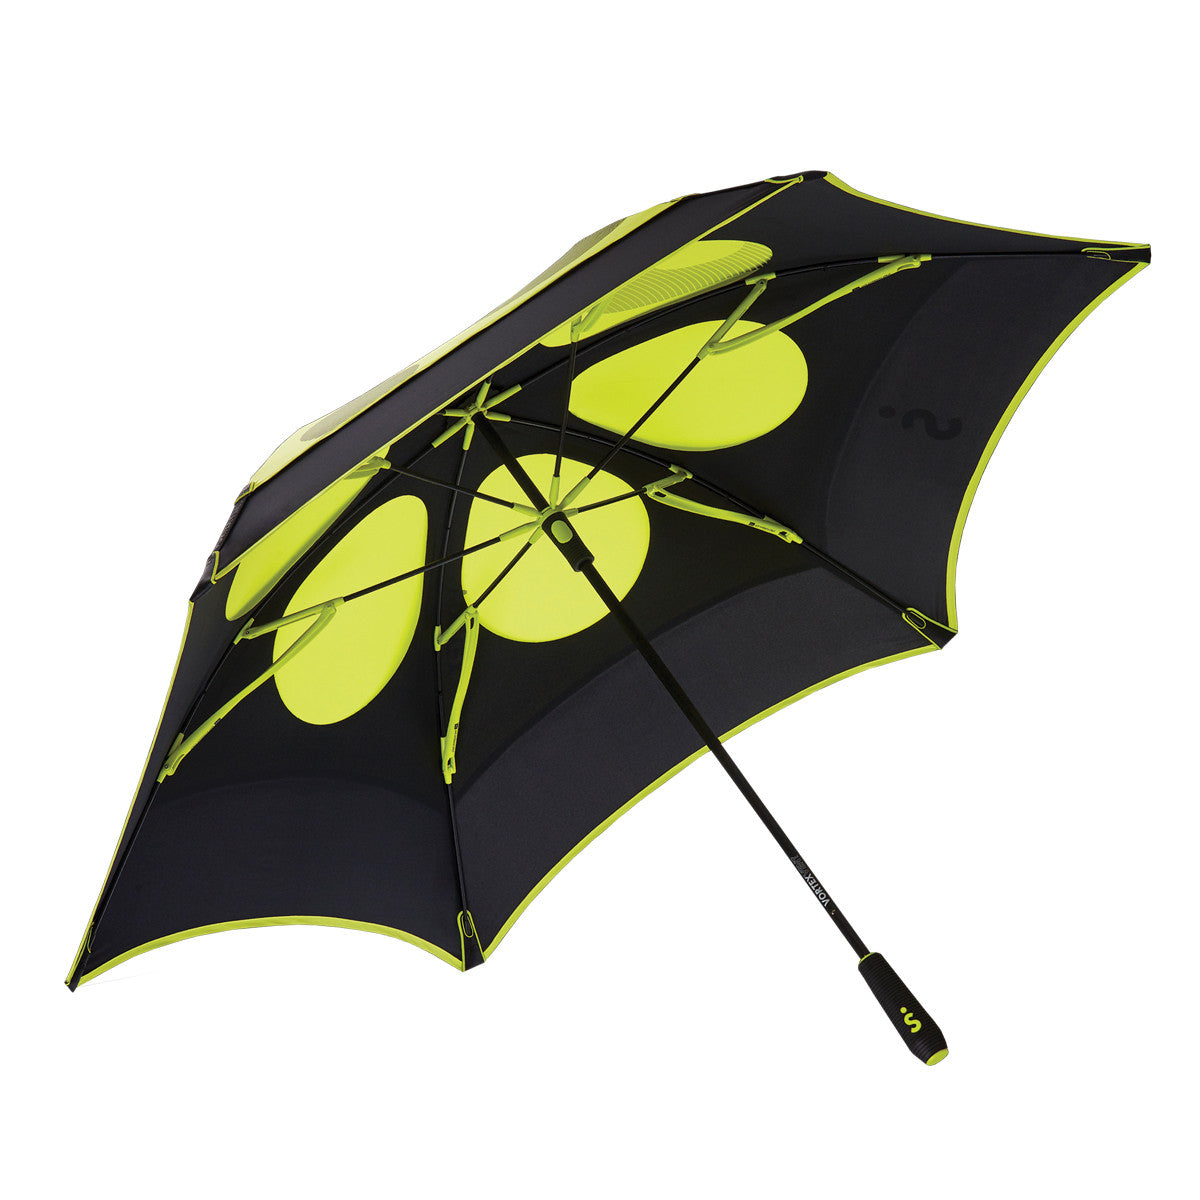 bright lime green and black vented double canopy wind-resistant three person Vortex Vent golf umbrella with black and lime green fiberglass frame and rubber grip, open, as viewed from the underside